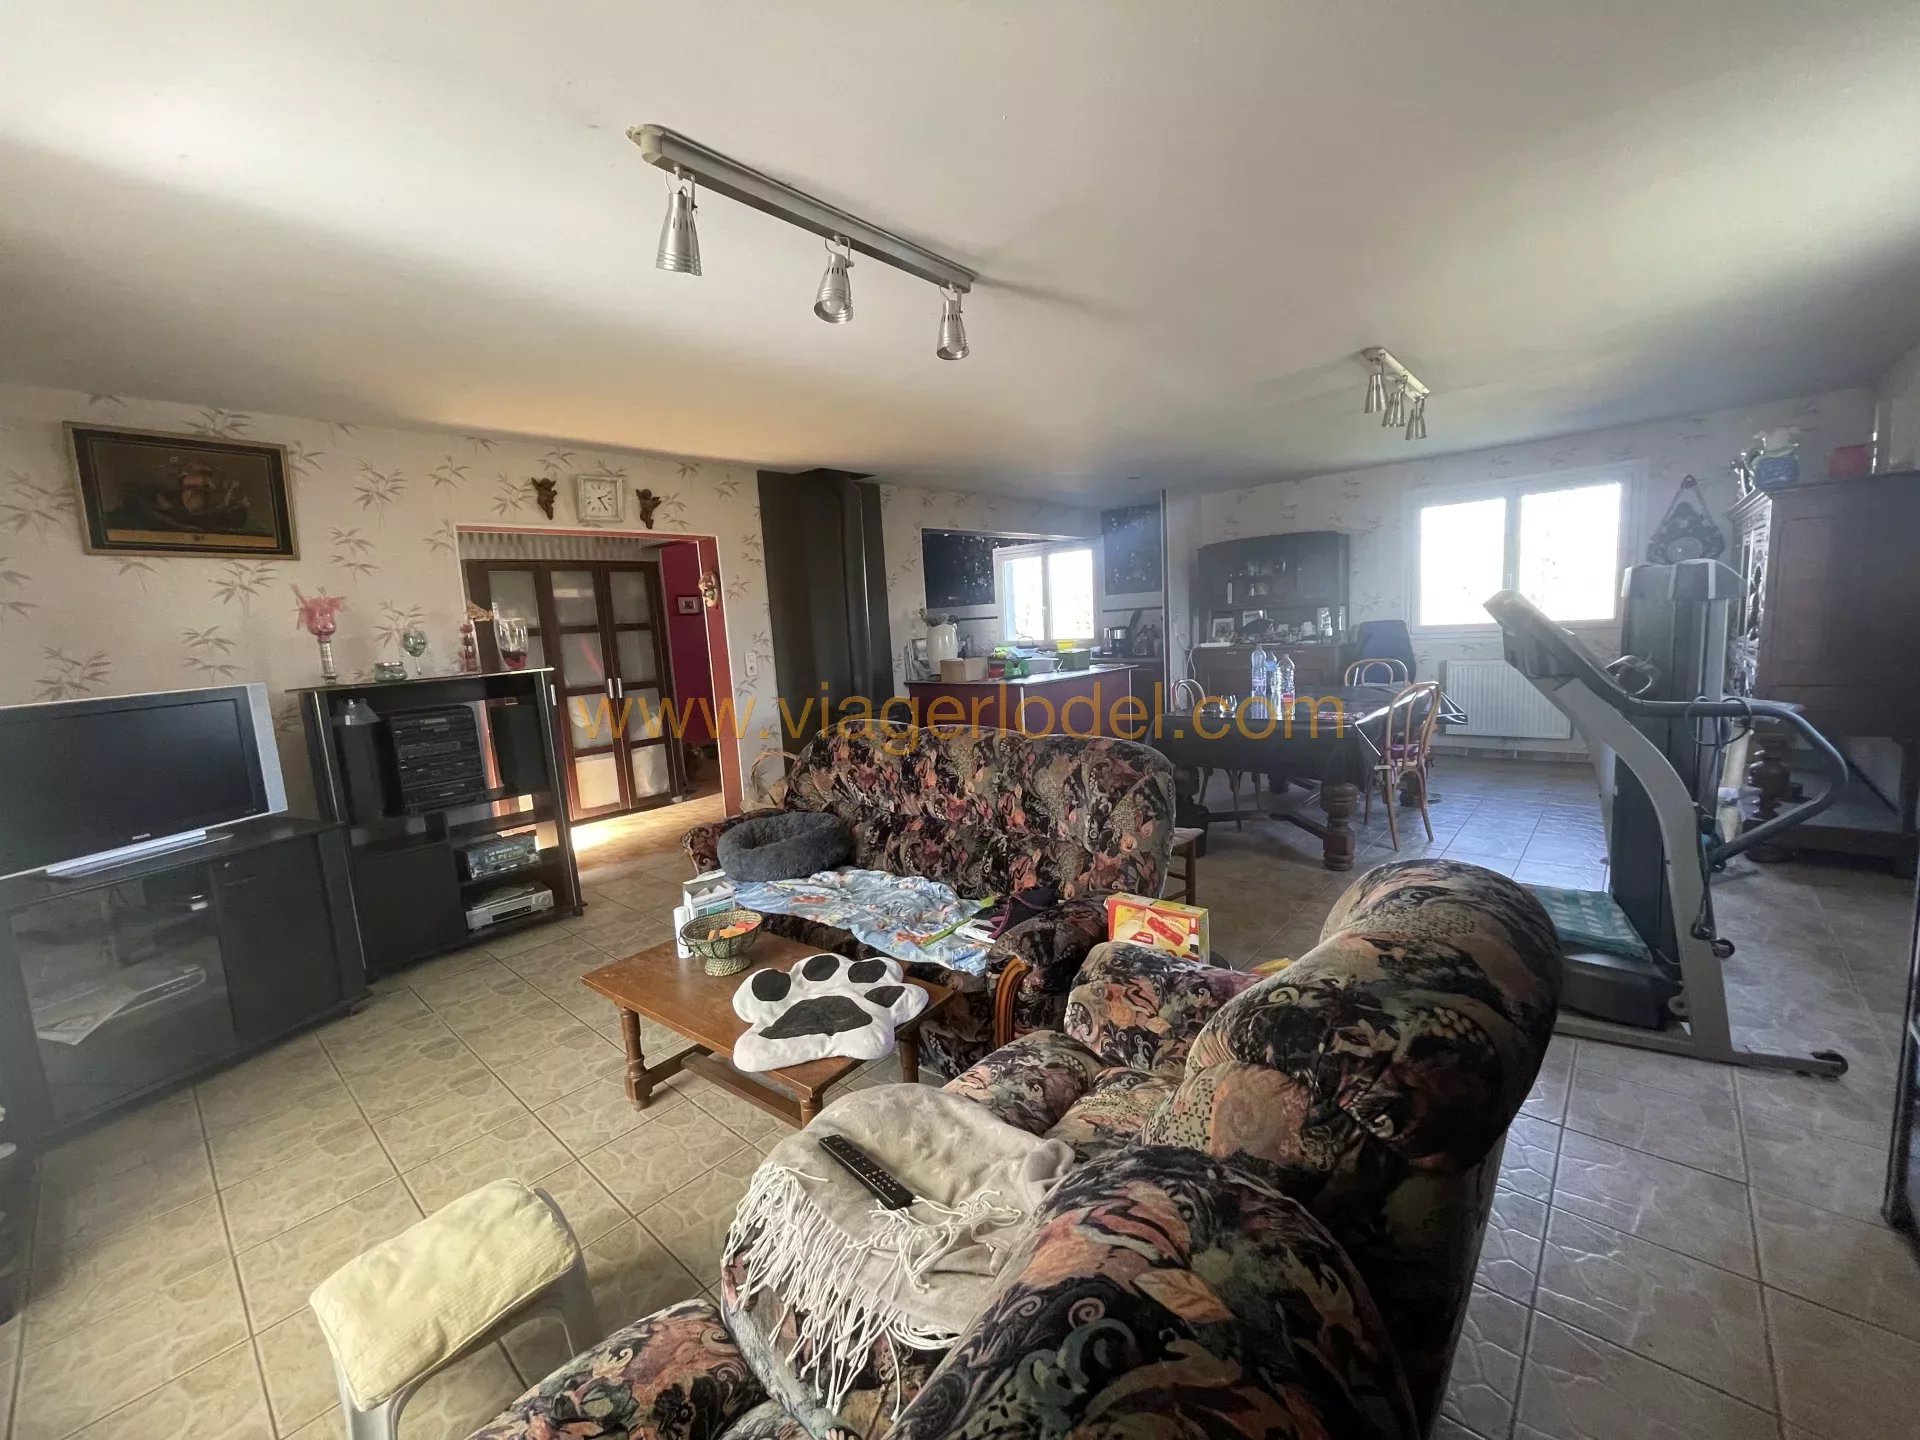 Ref. 9035 - BARE OWNERSHIP - SAINT PLANCHERS (50) - Occupied house